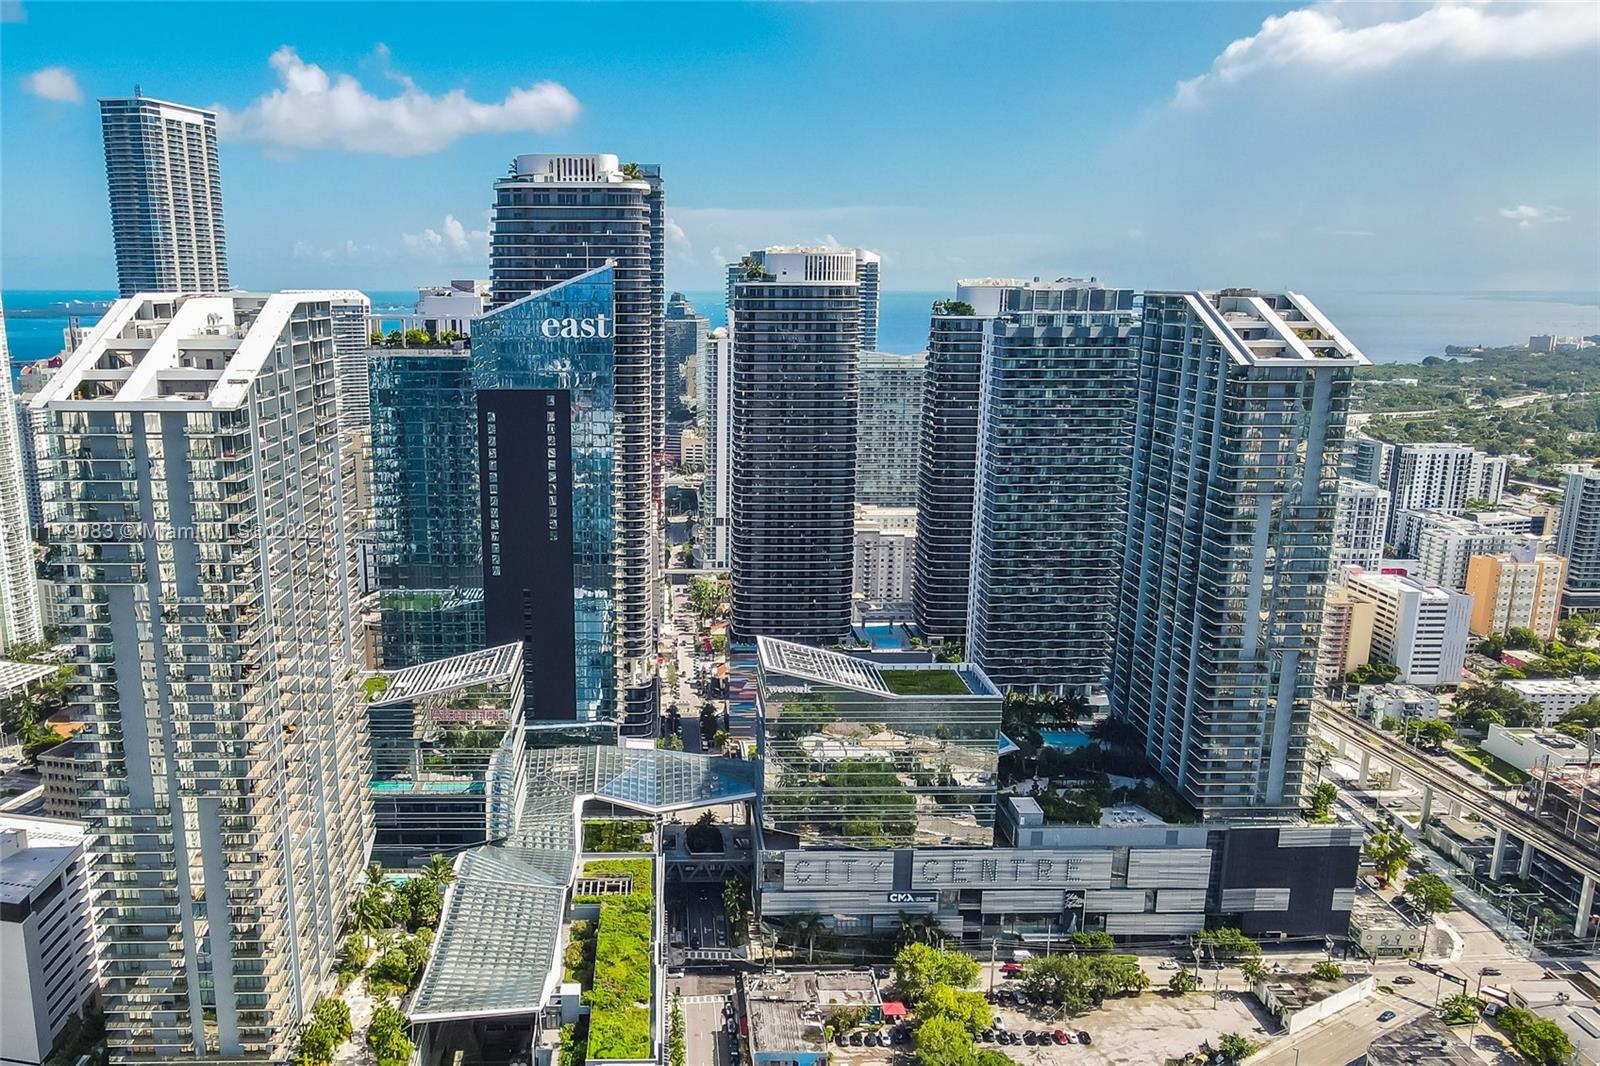 Brickell Heights East Tower image #60